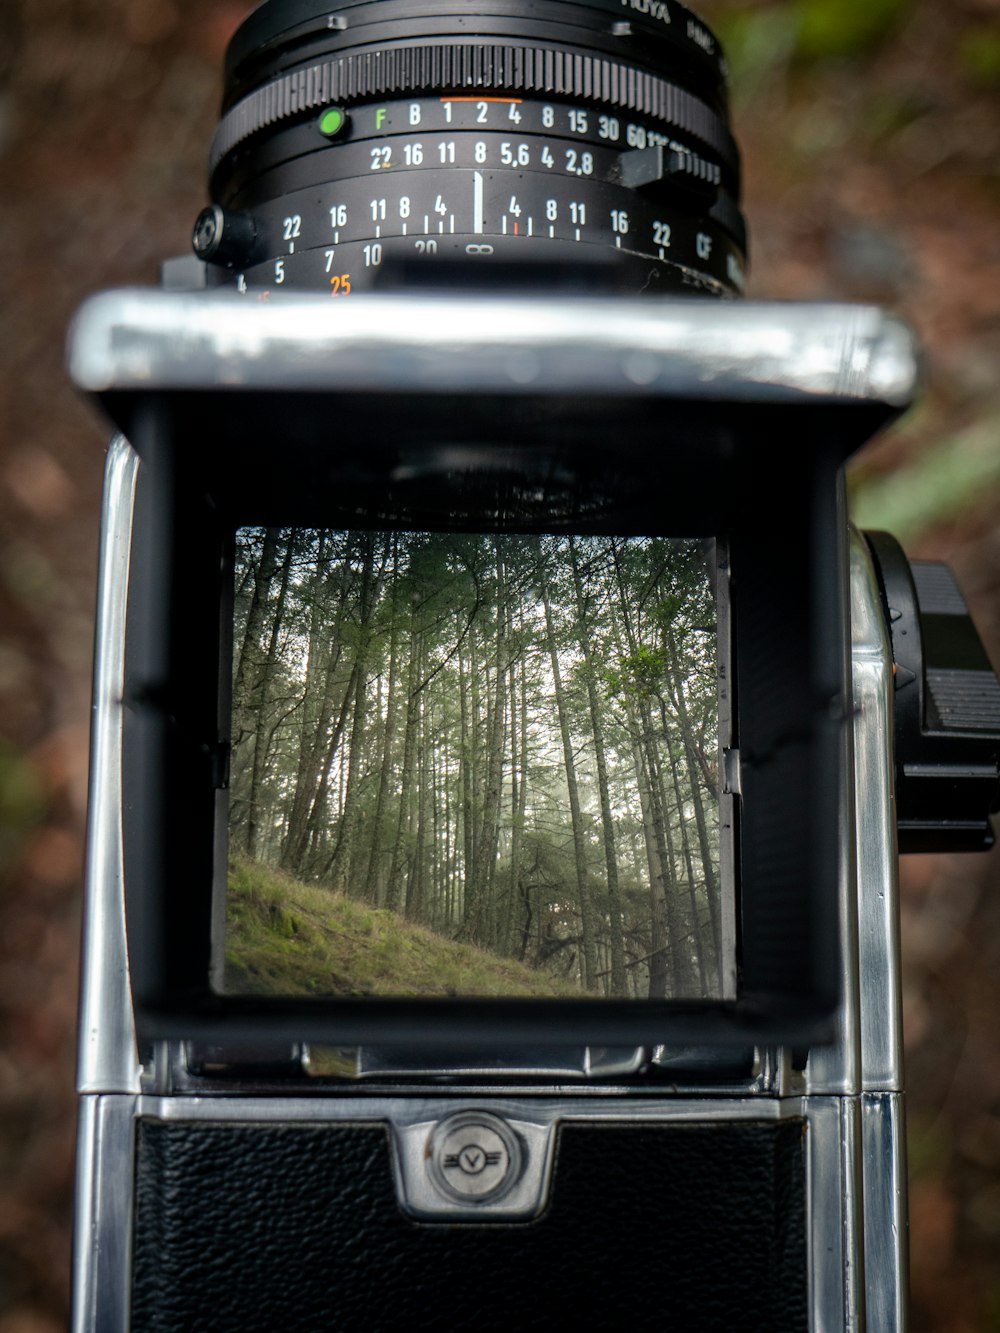 a close up of a camera with trees in the background